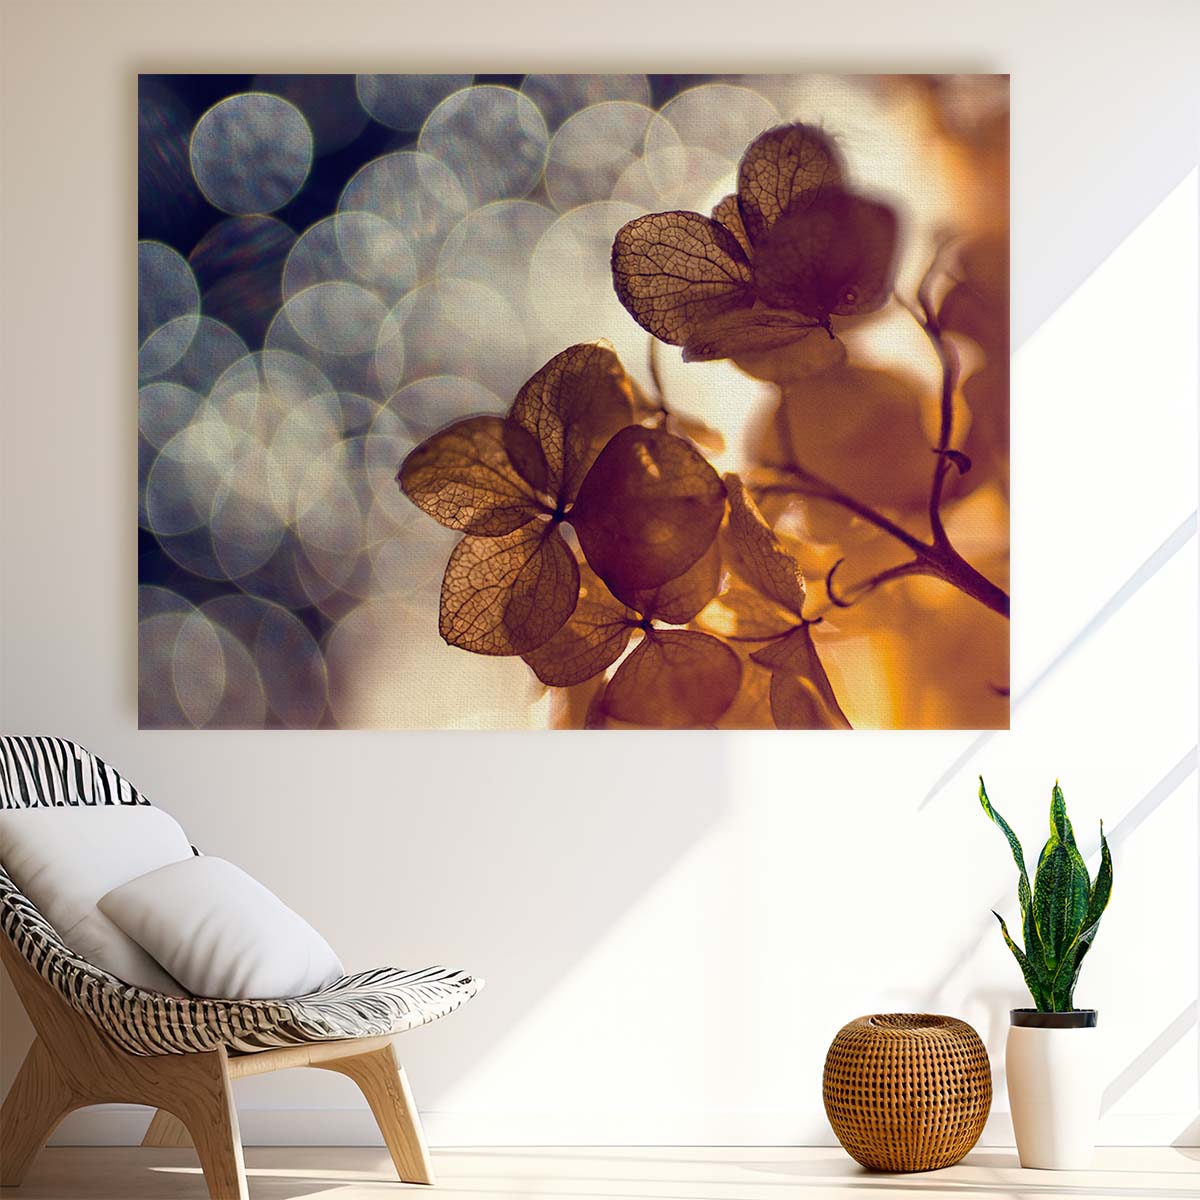 Golden Autumn Leaves Macro Bokeh Floral Wall Art by Luxuriance Designs. Made in USA.